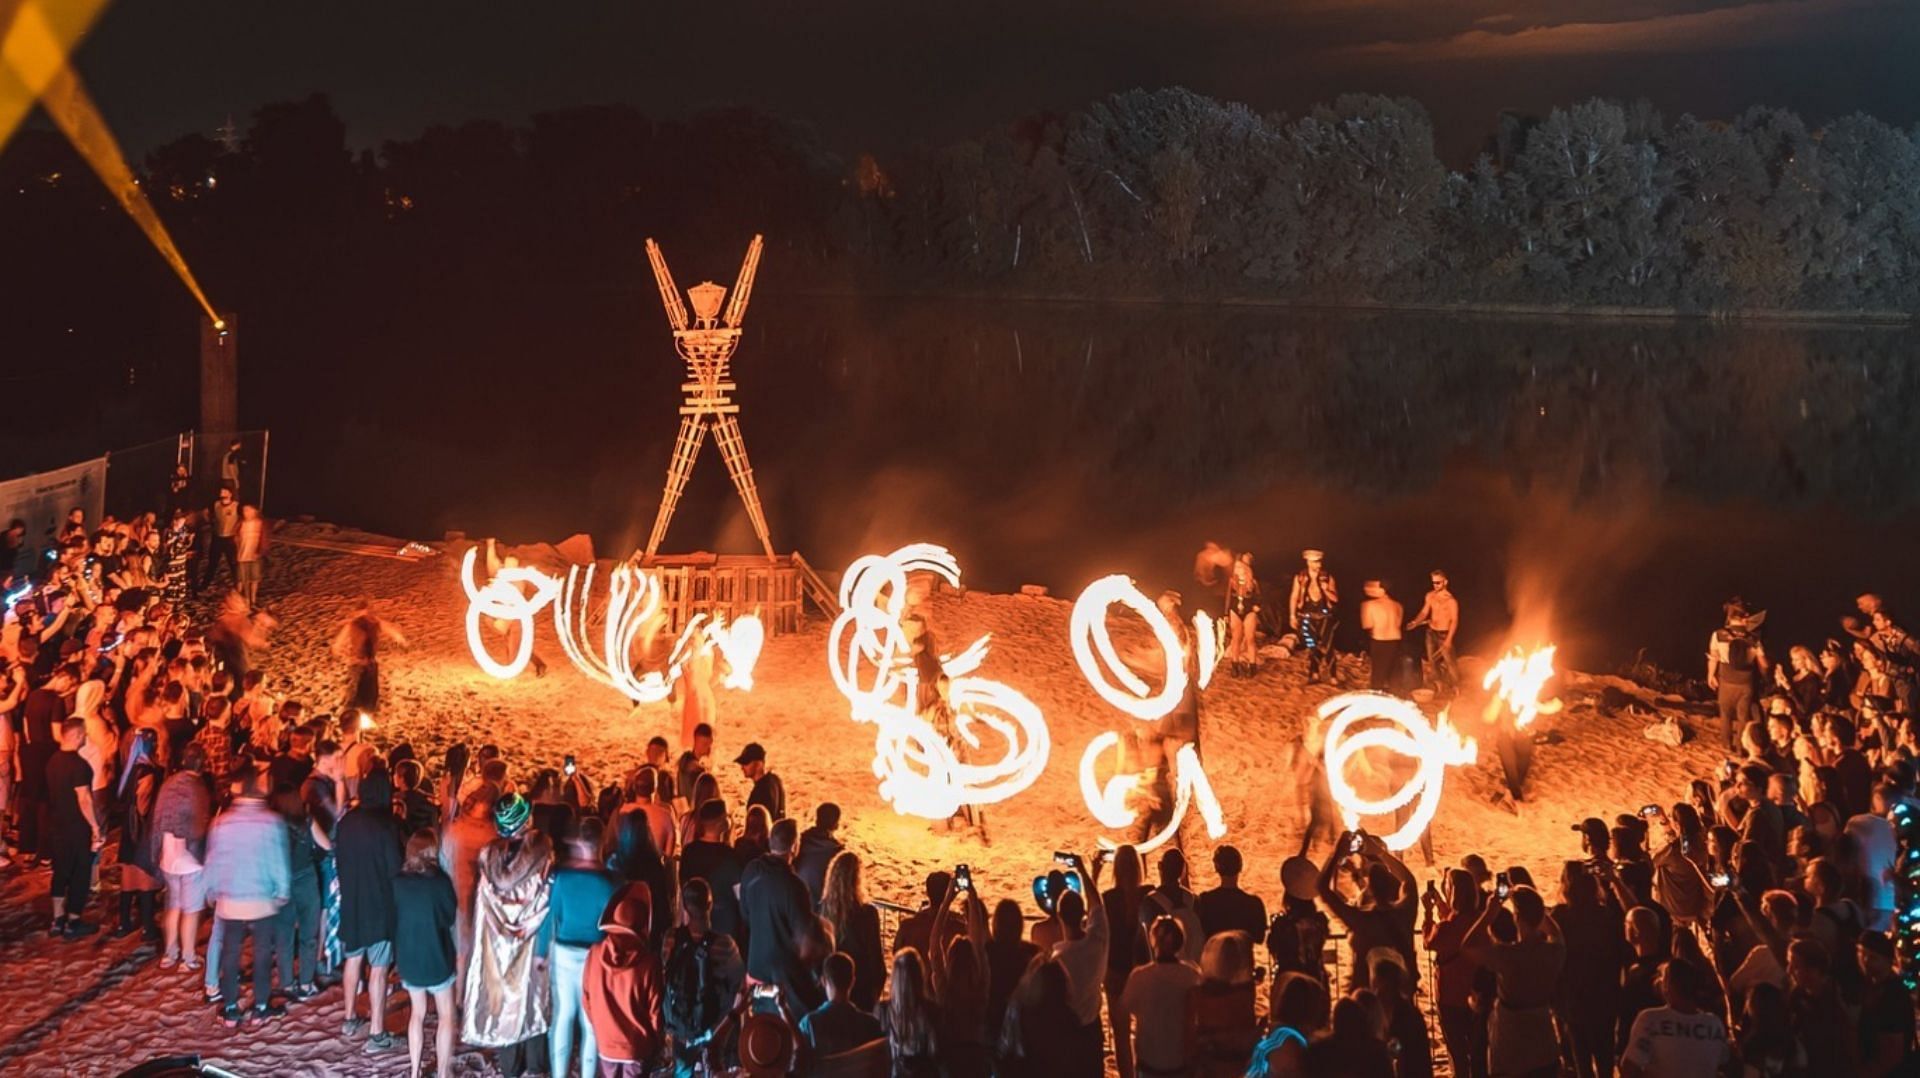 Radical self-expression festival Burning Man tickets were sold out in 29 minutes soon after the main sale went live on March 30 (Image via Instagram/@burningman)